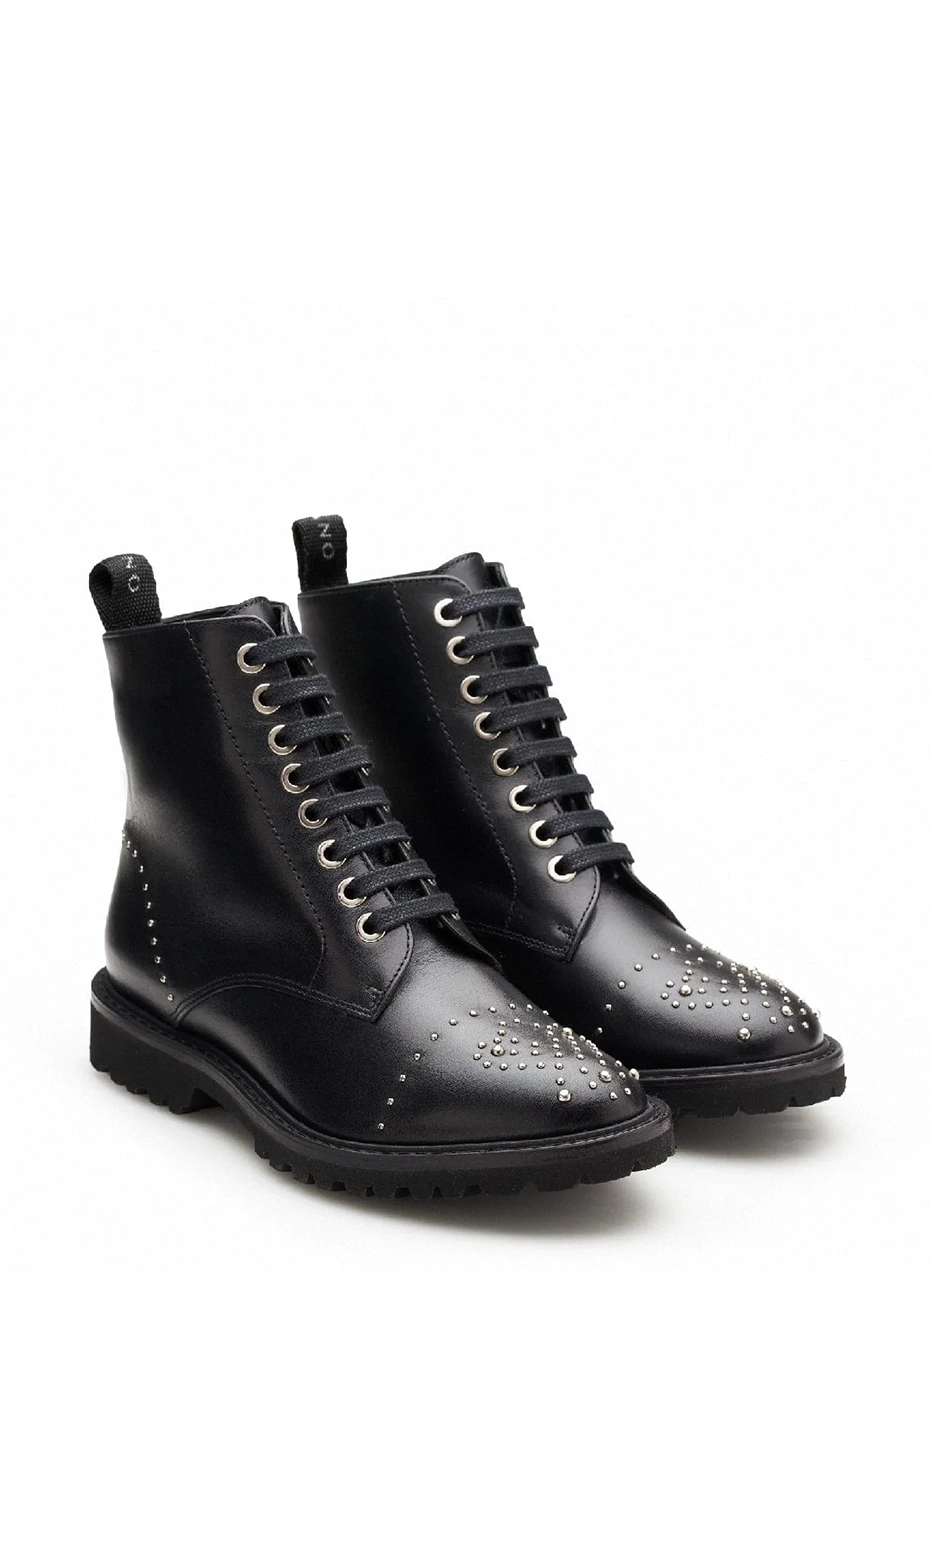 black embellished combat boots mariano shoes